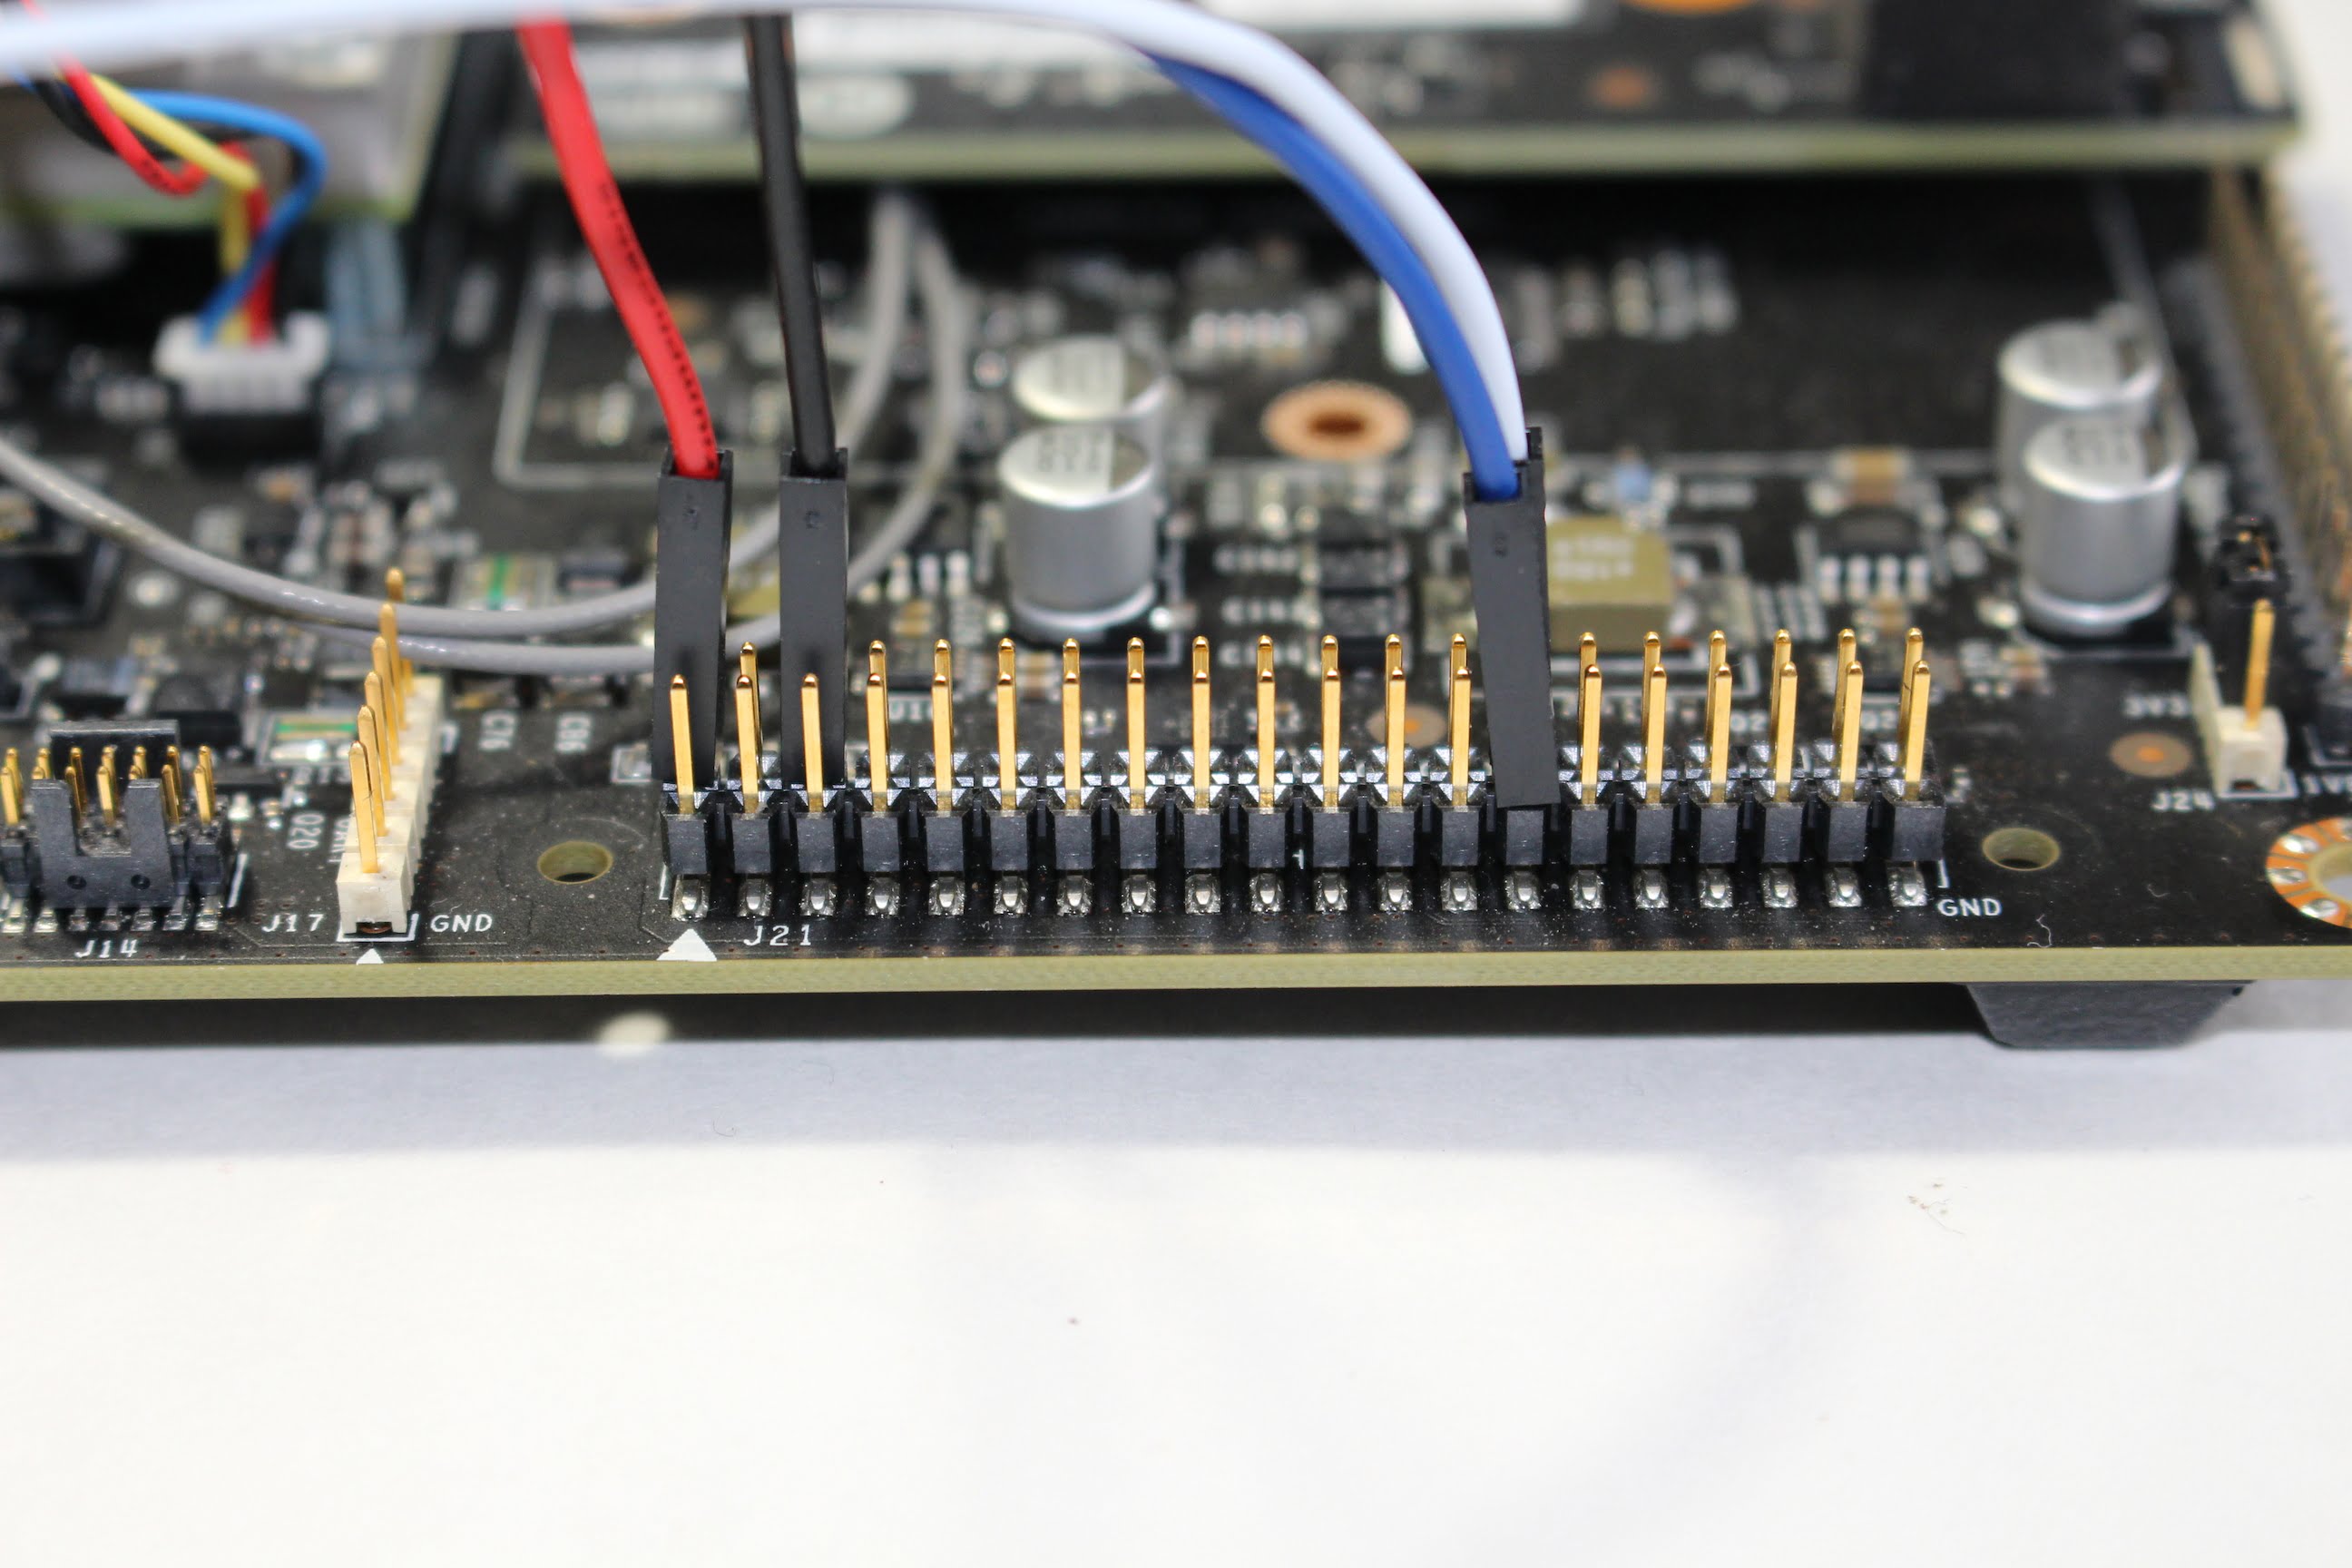 I2C Connection for Jetson TX1